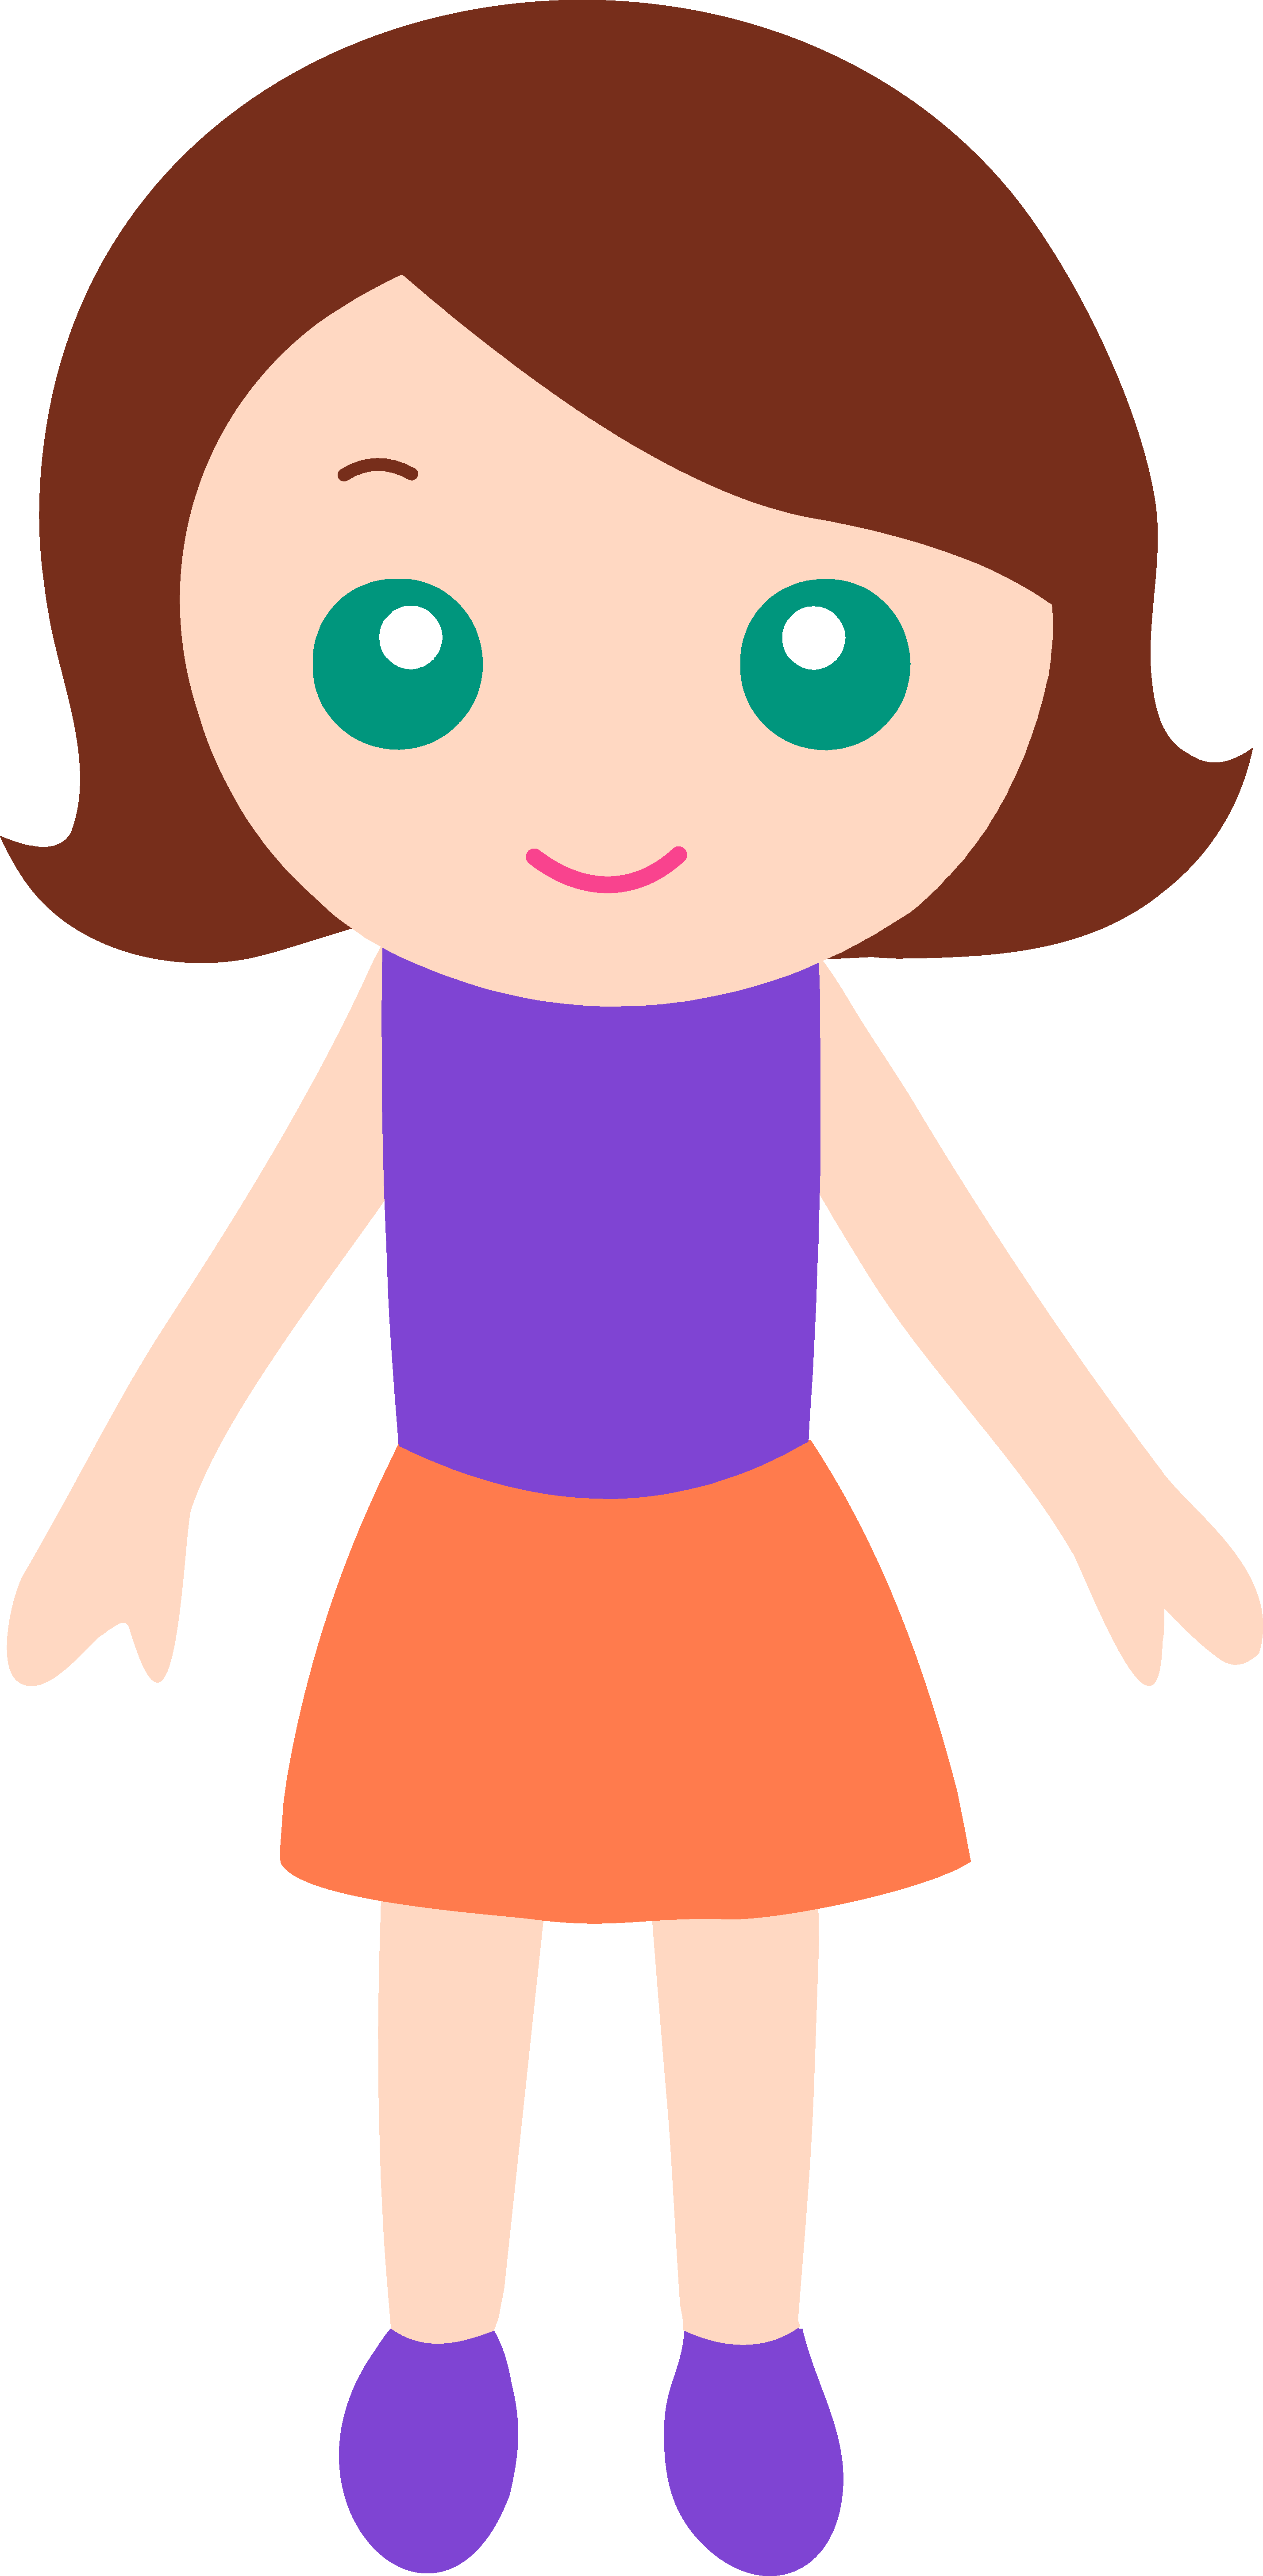 Weight clipart animated. Girl panda free images